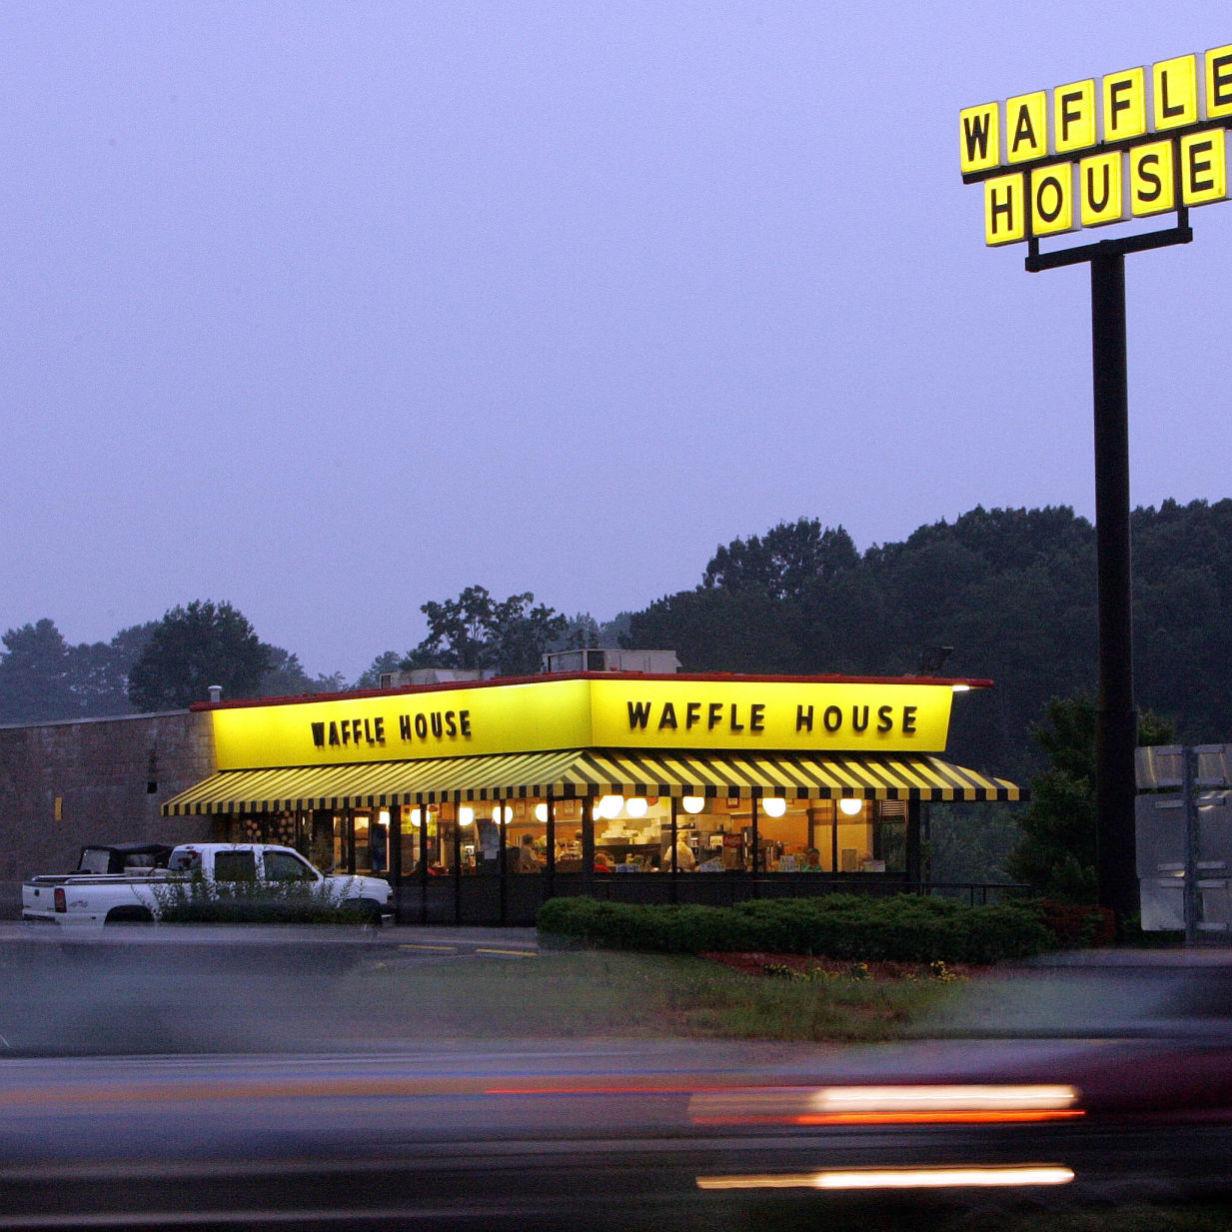 Waffle House Olive Garden And Other Restaurant Chains Take A Big Hit National Billingsgazette Com